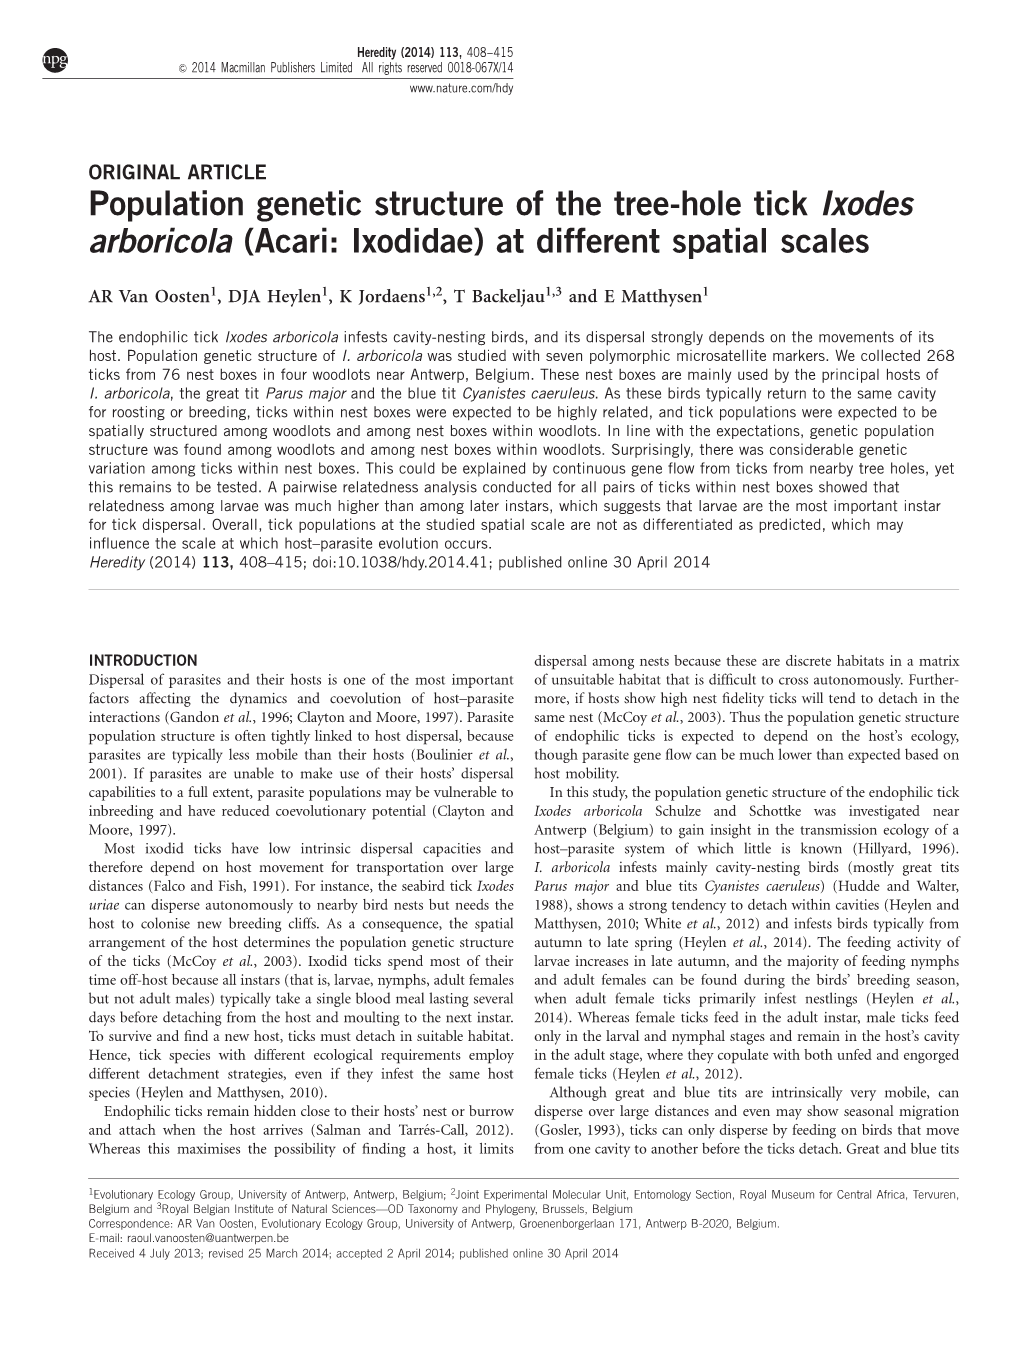 Population Genetic Structure of the Tree-Hole Tick Ixodes Arboricola (Acari: Ixodidae) at Different Spatial Scales